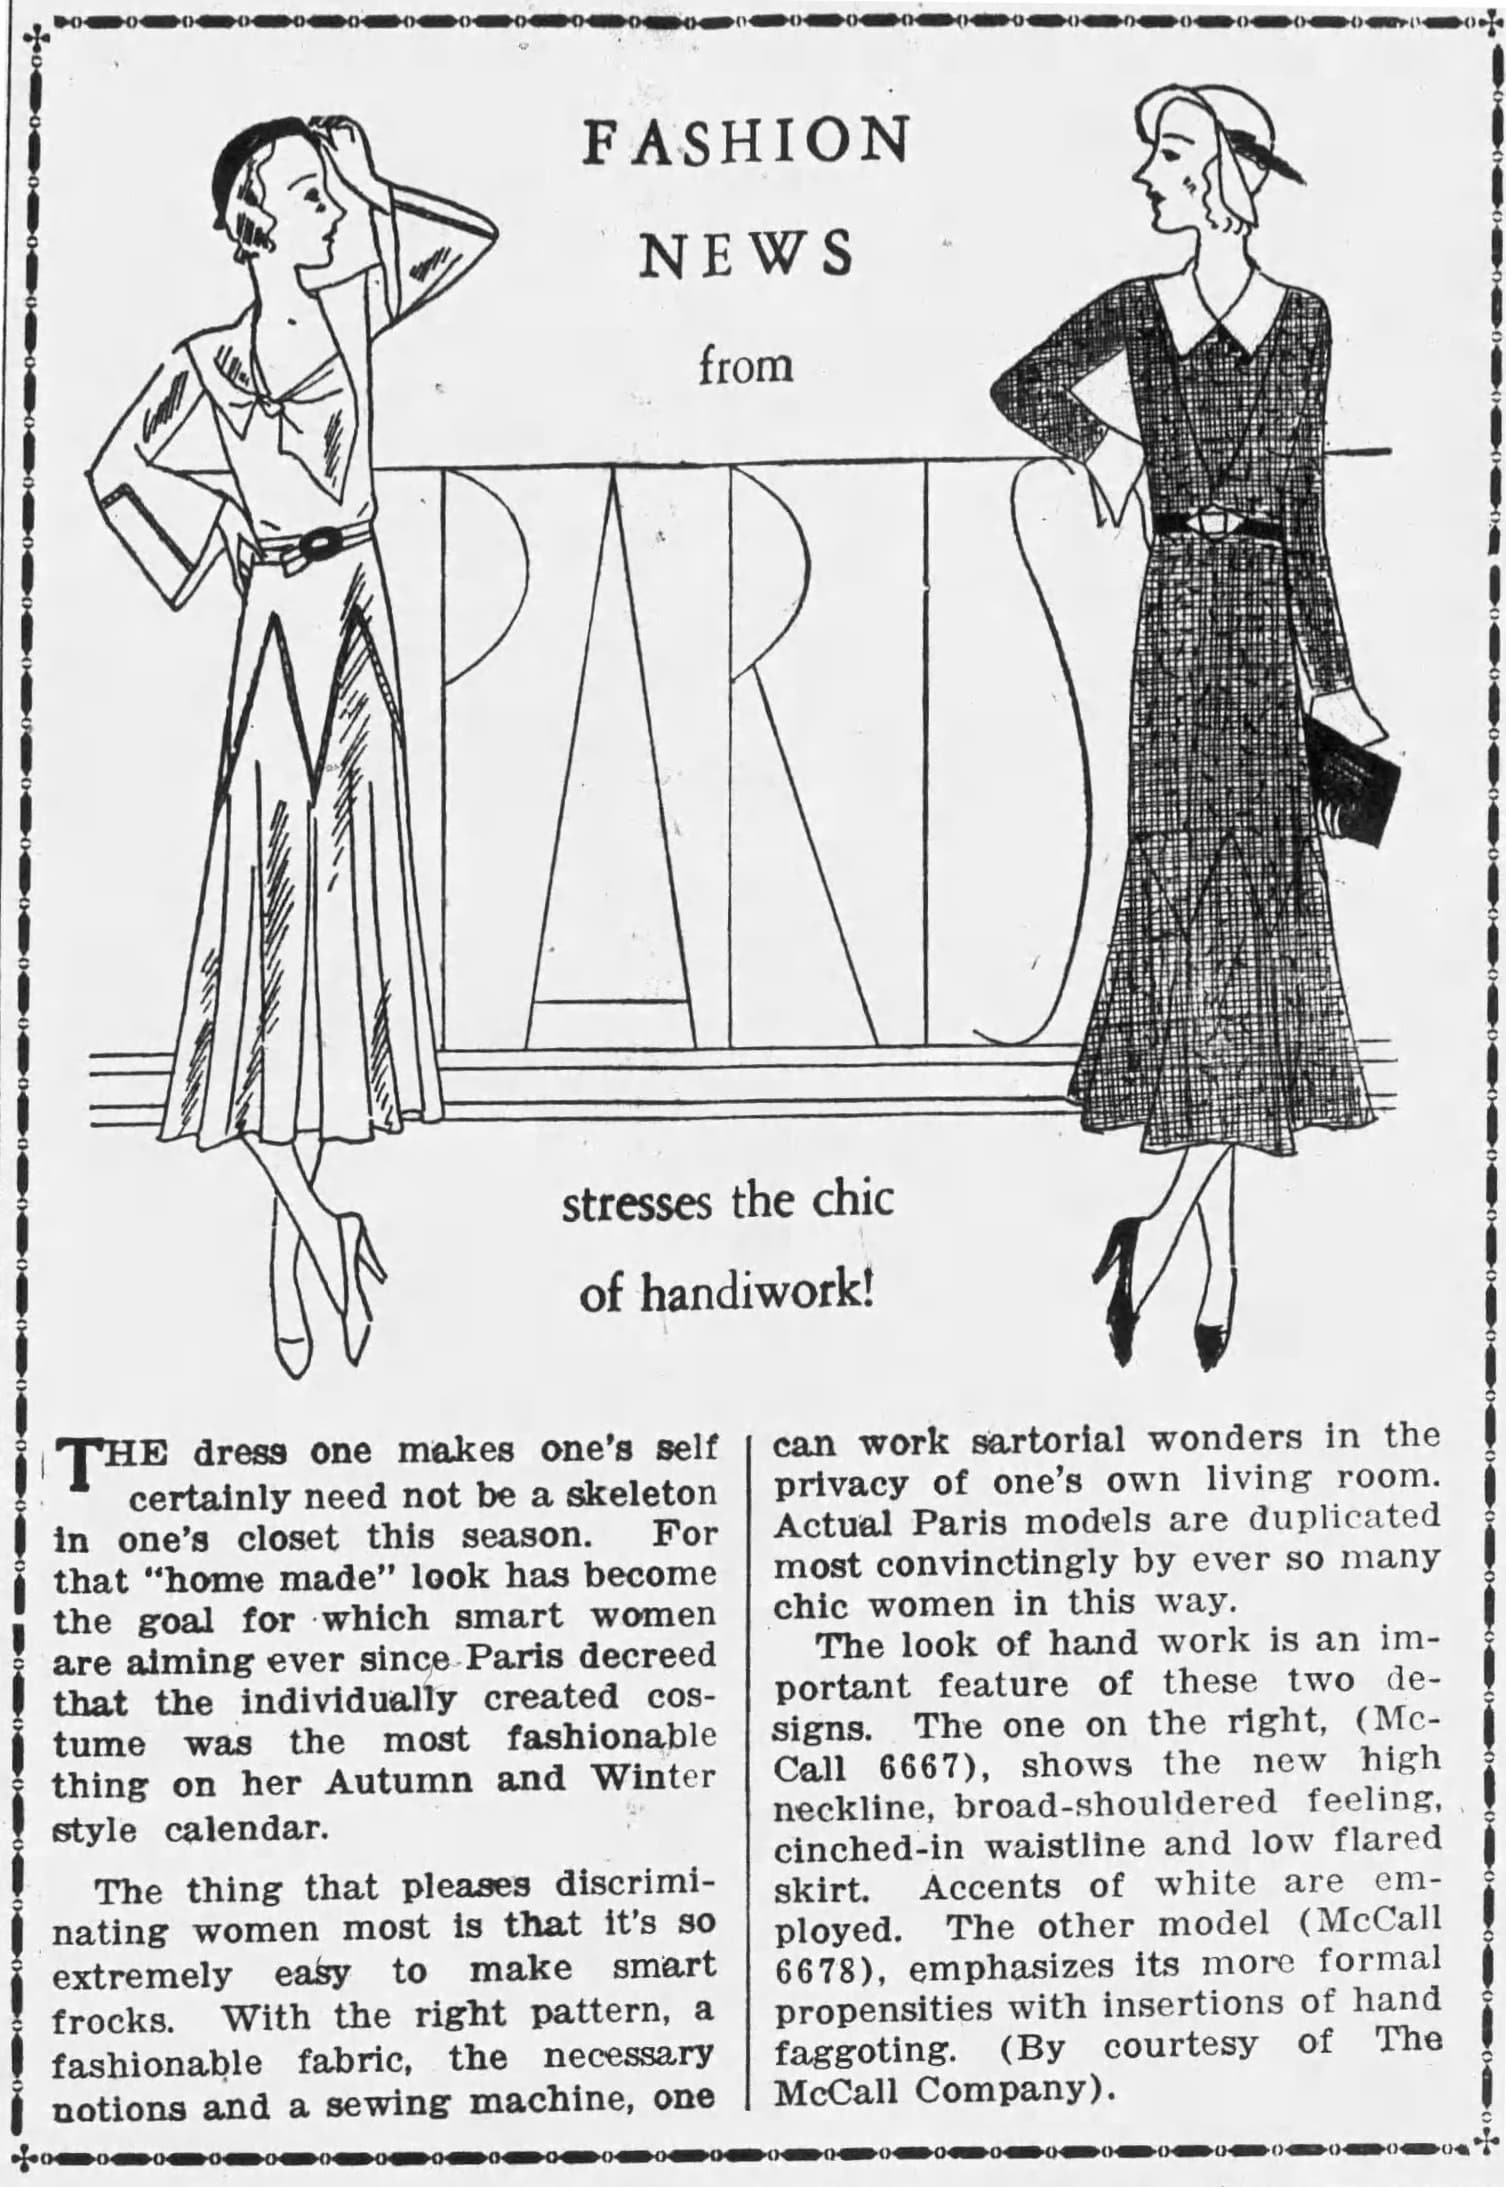 Vintage patterns: problems and tips - SEWING CHANEL-STYLE